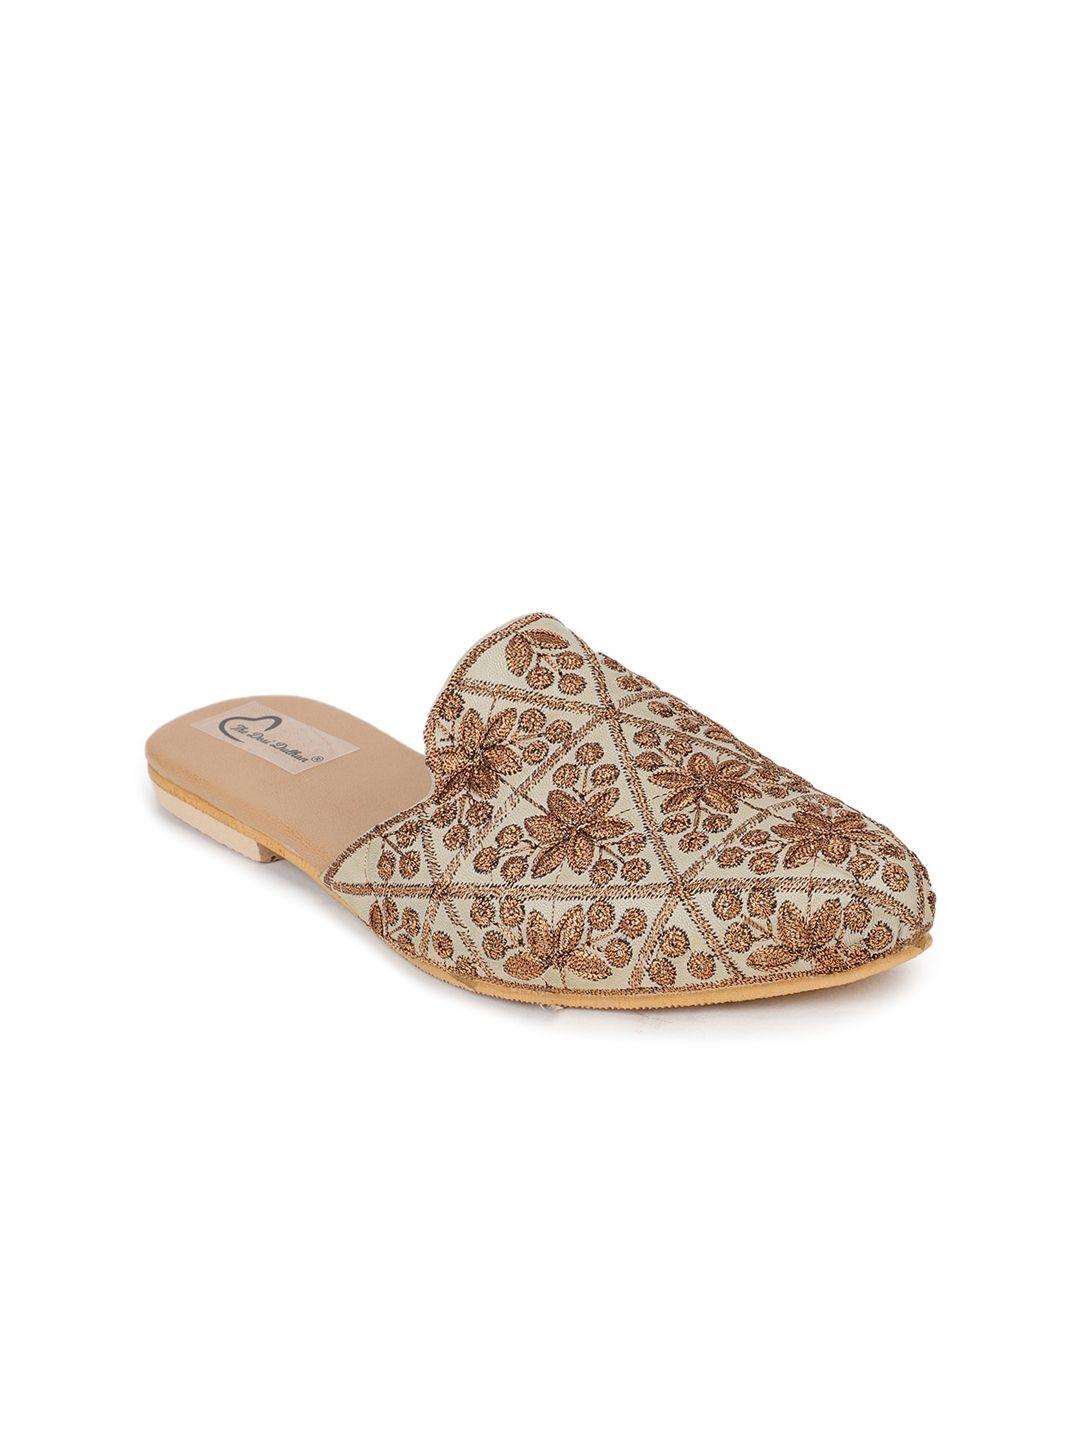 the desi dulhan women copper-toned embellished leather ethnic flats